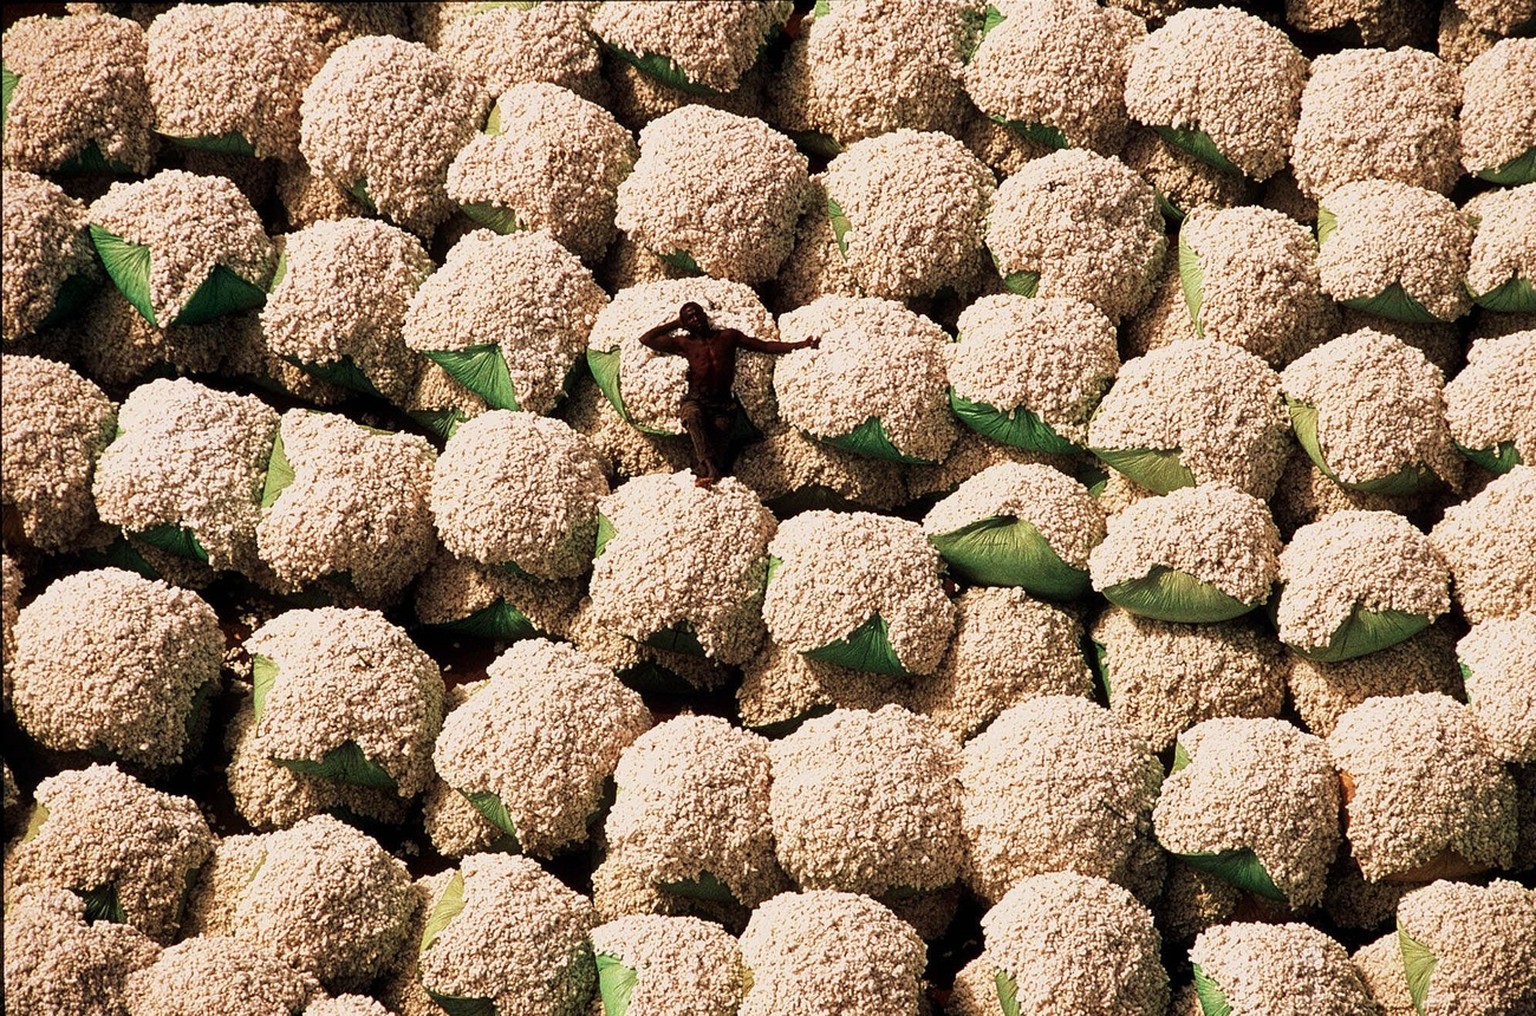 A worker in Thonakaha, Cote d&#039;Ivoire, rests on bales of cotton in this undated aerial photo. The image is part of a new photo exhibit and coffee-table book titled &#039;Earth From Above&#039;, by ...